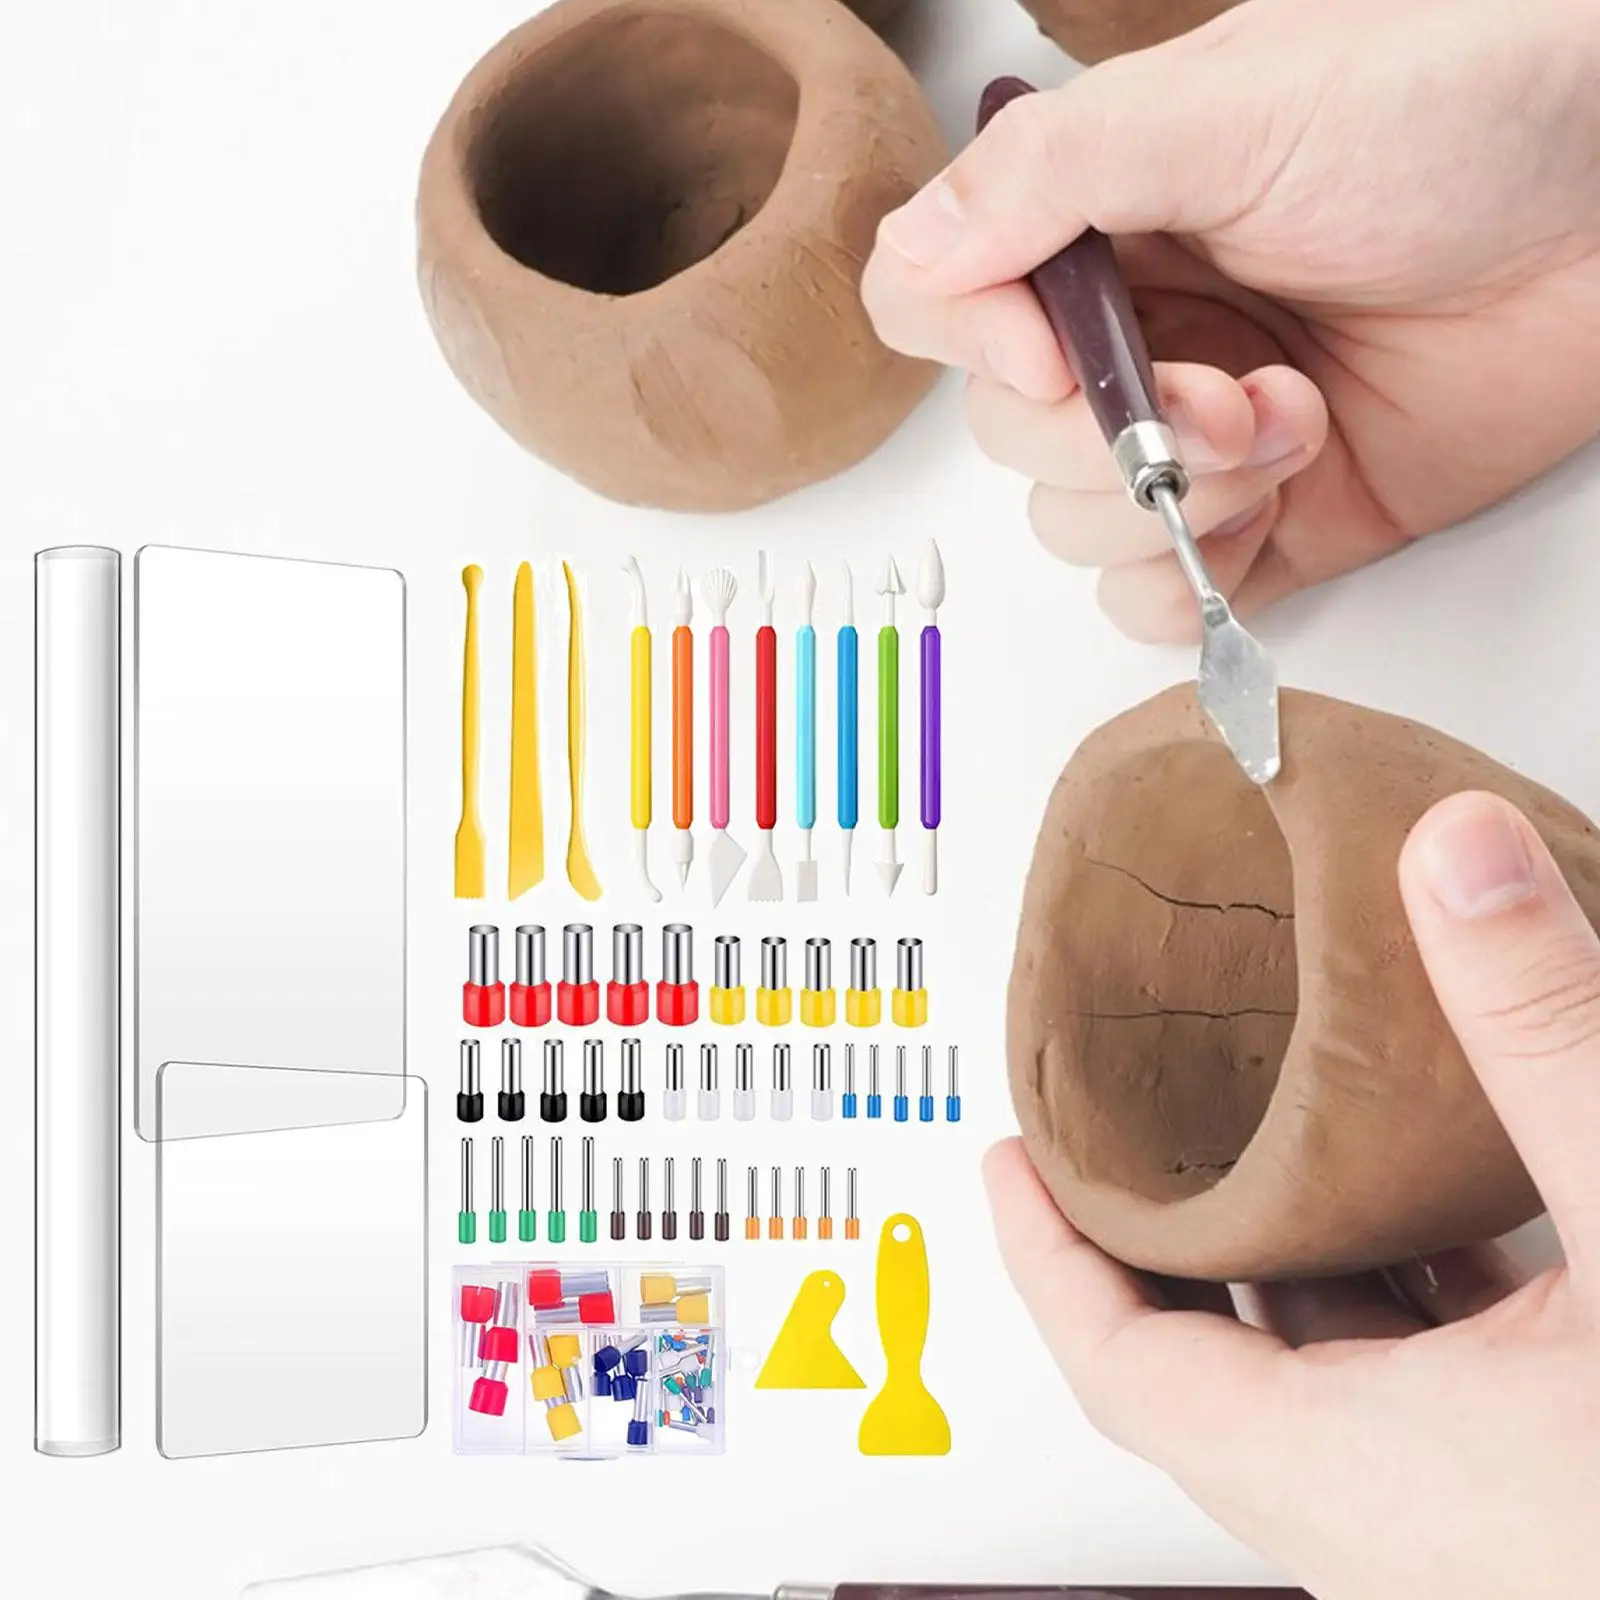 56Pcs Pottery Clay Sculpting Tools with Handles Smoothing DIY Clay Tools for Crafts, Embossing Pattern, Cutting, Professionals